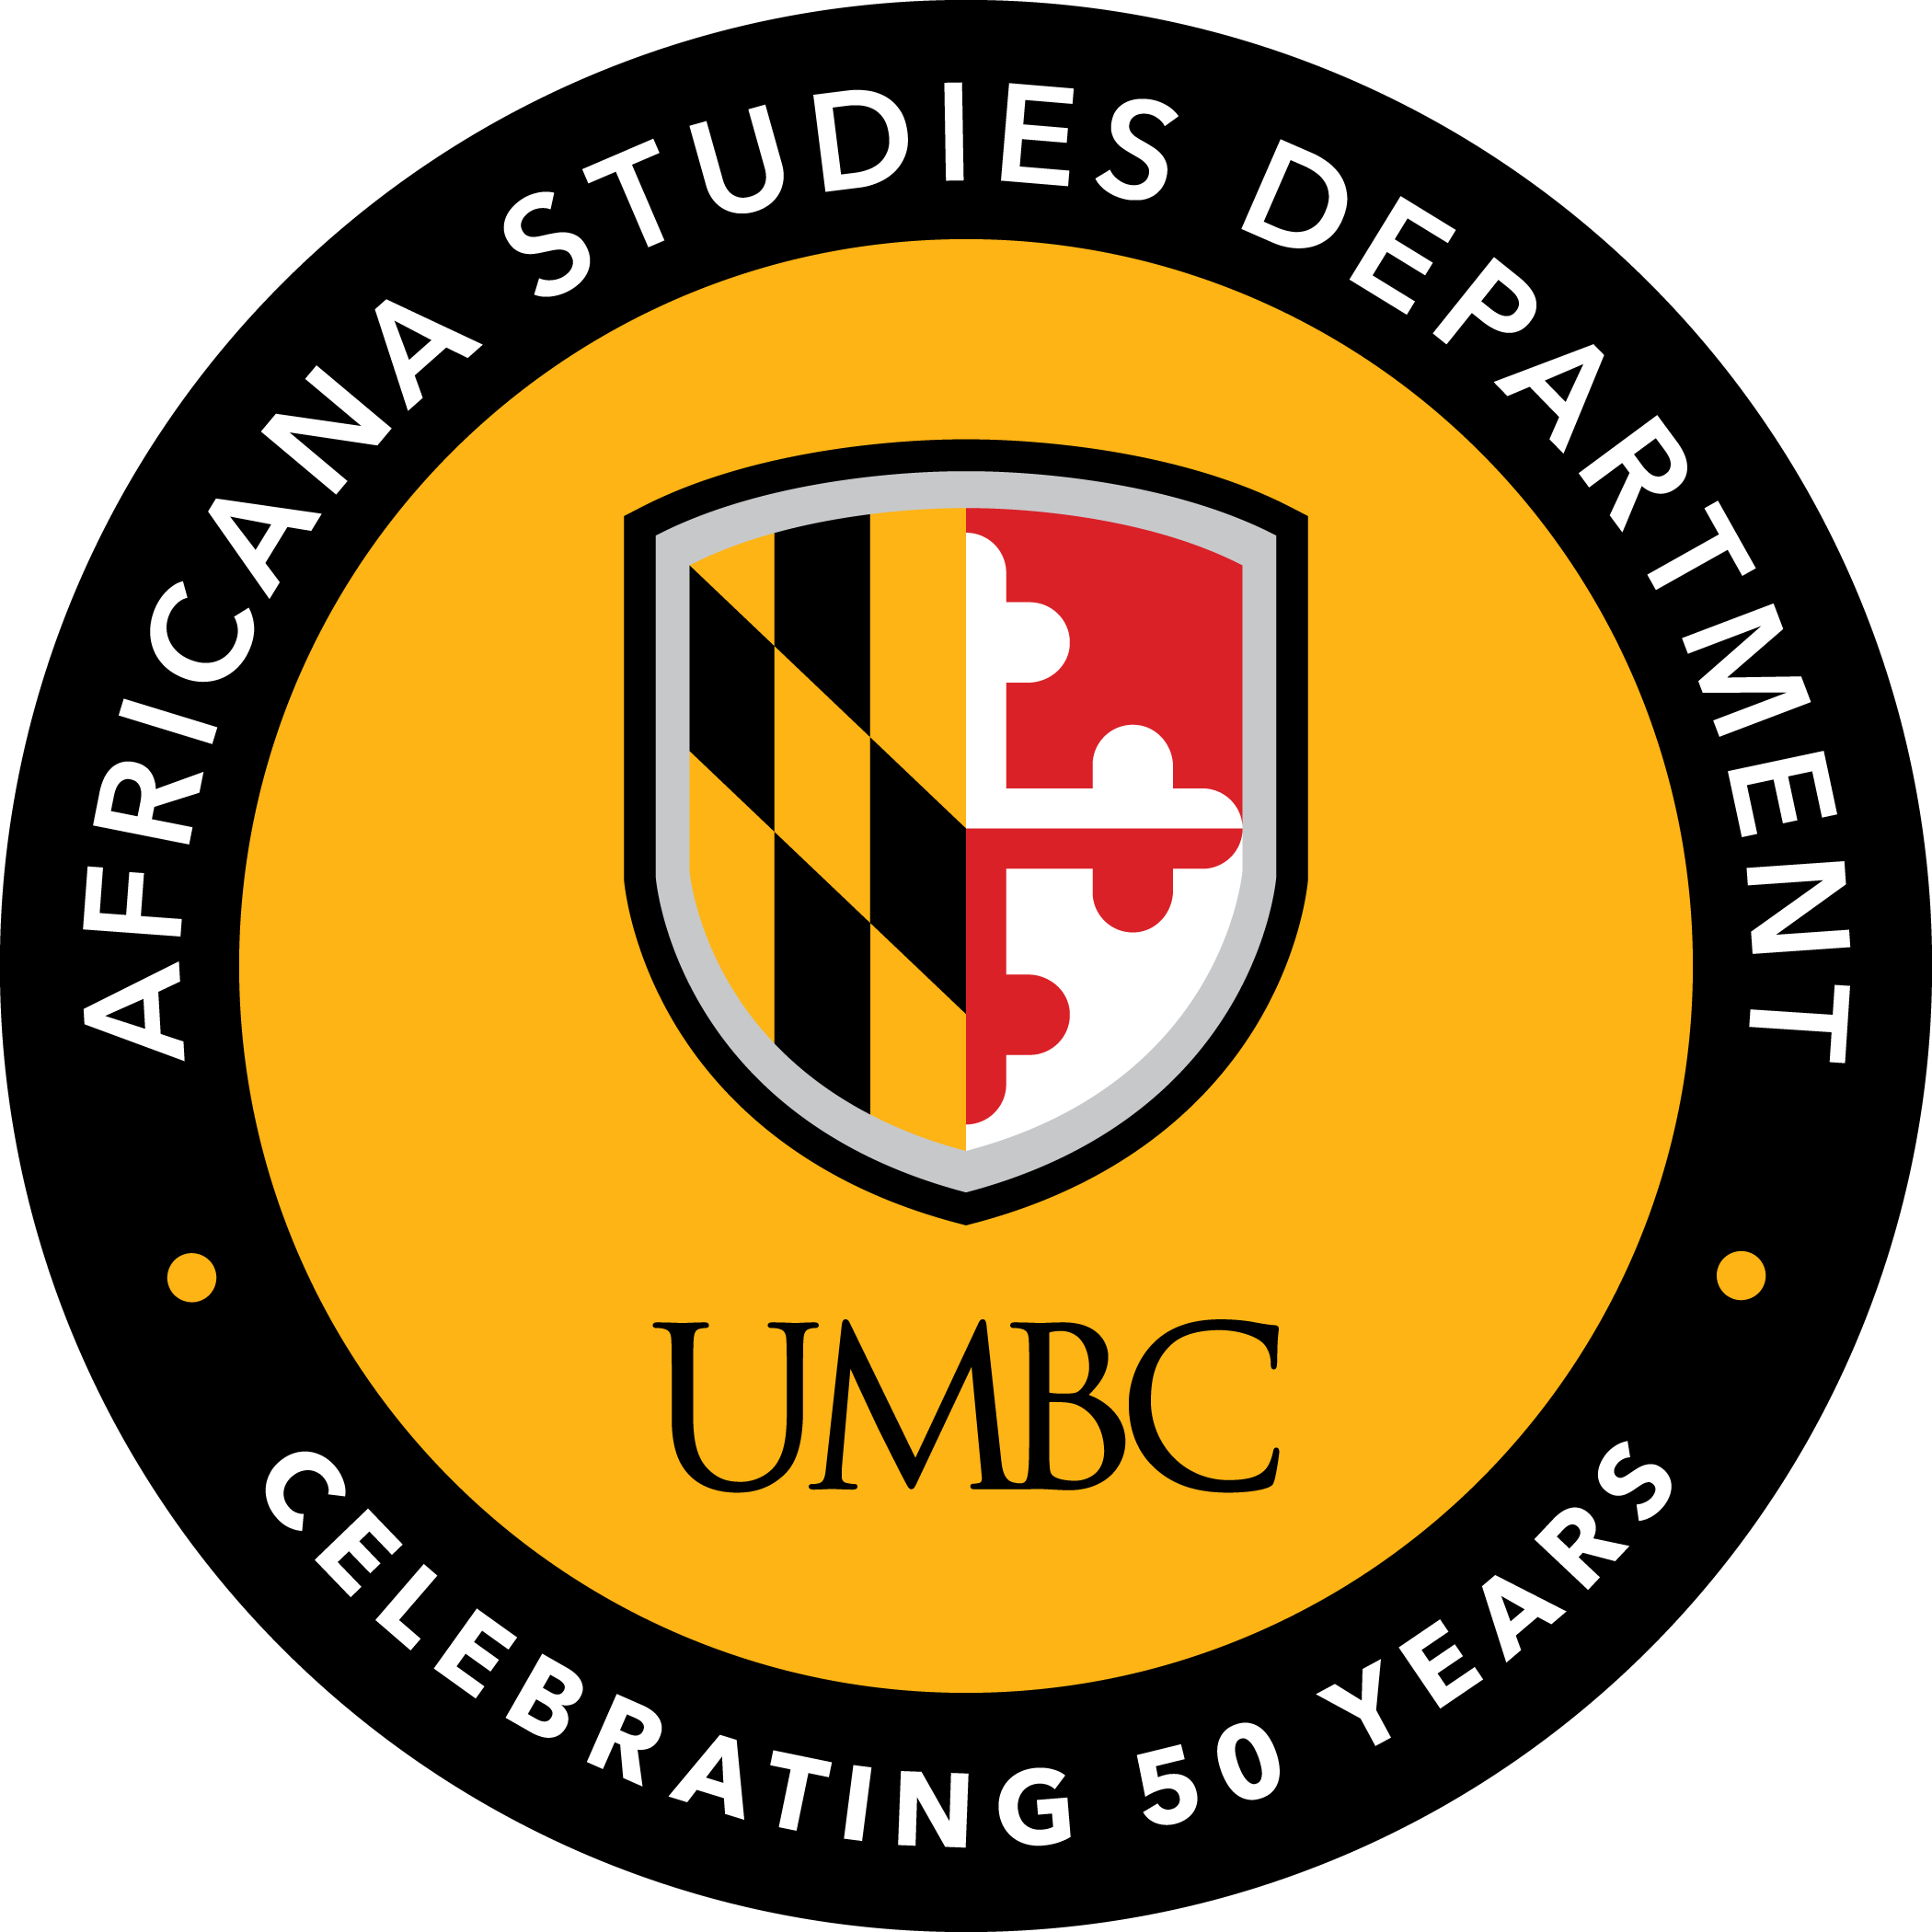 A logo says Africana Studies Department Celebrating 50 Years